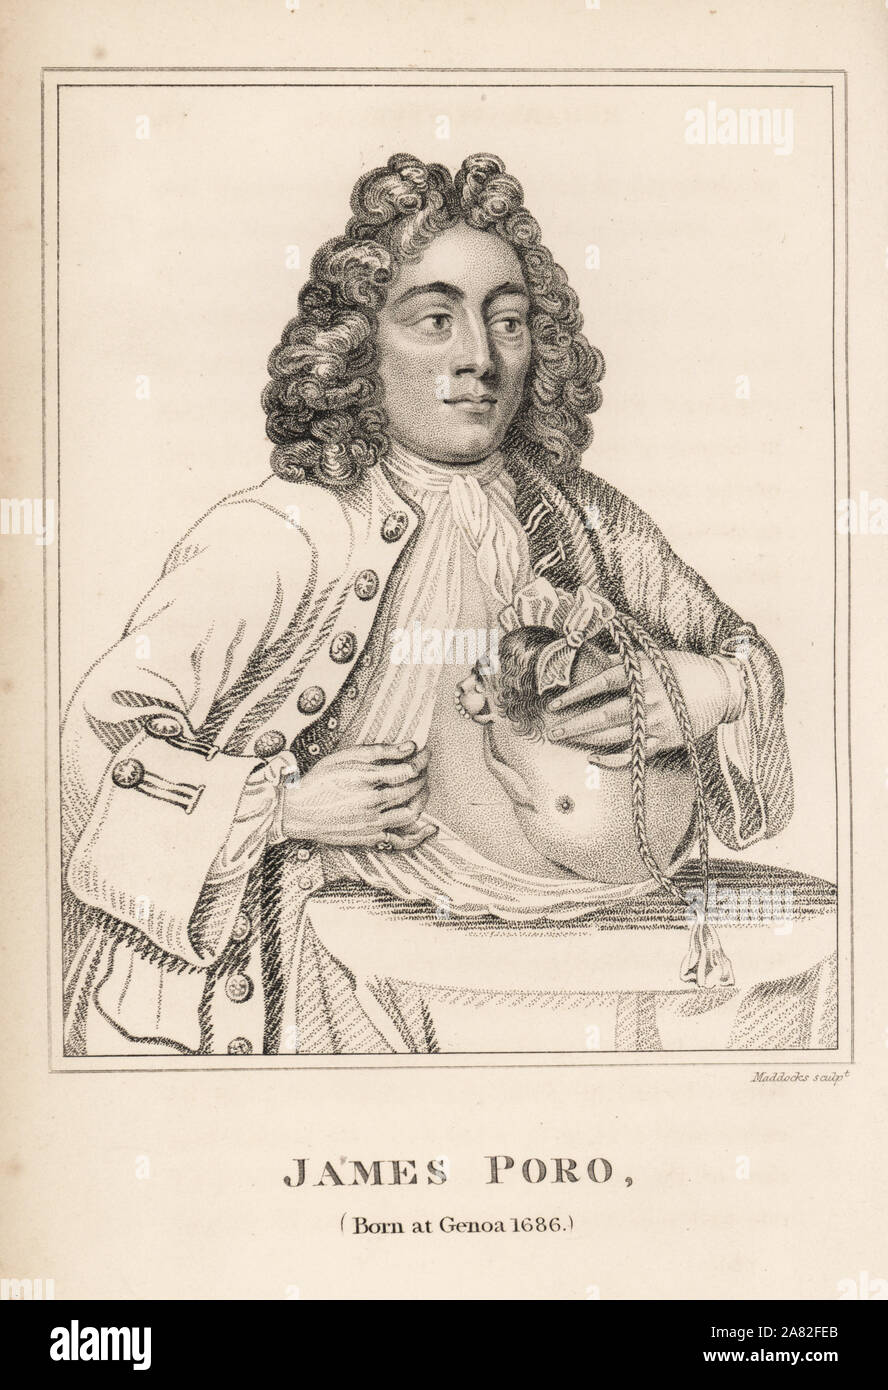 James Poro and his parasitic twin Matthew, exhibited in 1704 in London. Engraving by W. Maddocks from James Caulfield's Portraits, Memoirs and Characters of Remarkable Persons, London, 1819. Stock Photo